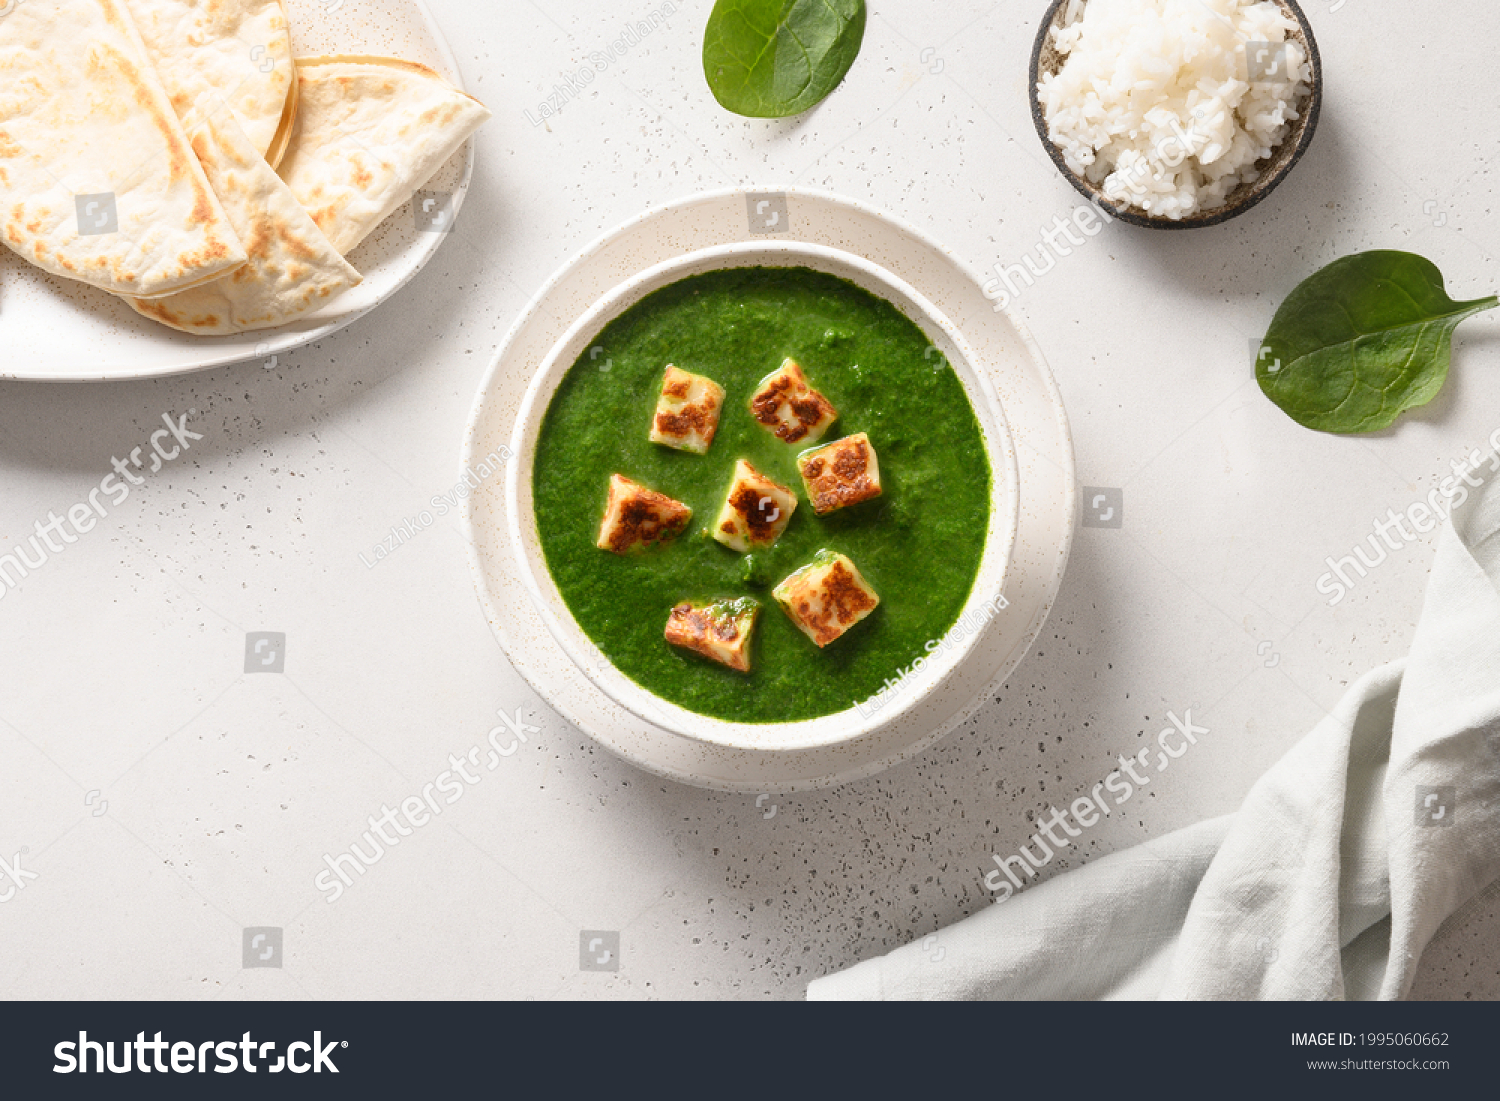 Indian vegetarian cuisine Palak Paneer of spinach and paneer cheese with chapati and basmati rice on white background. View from above. #1995060662